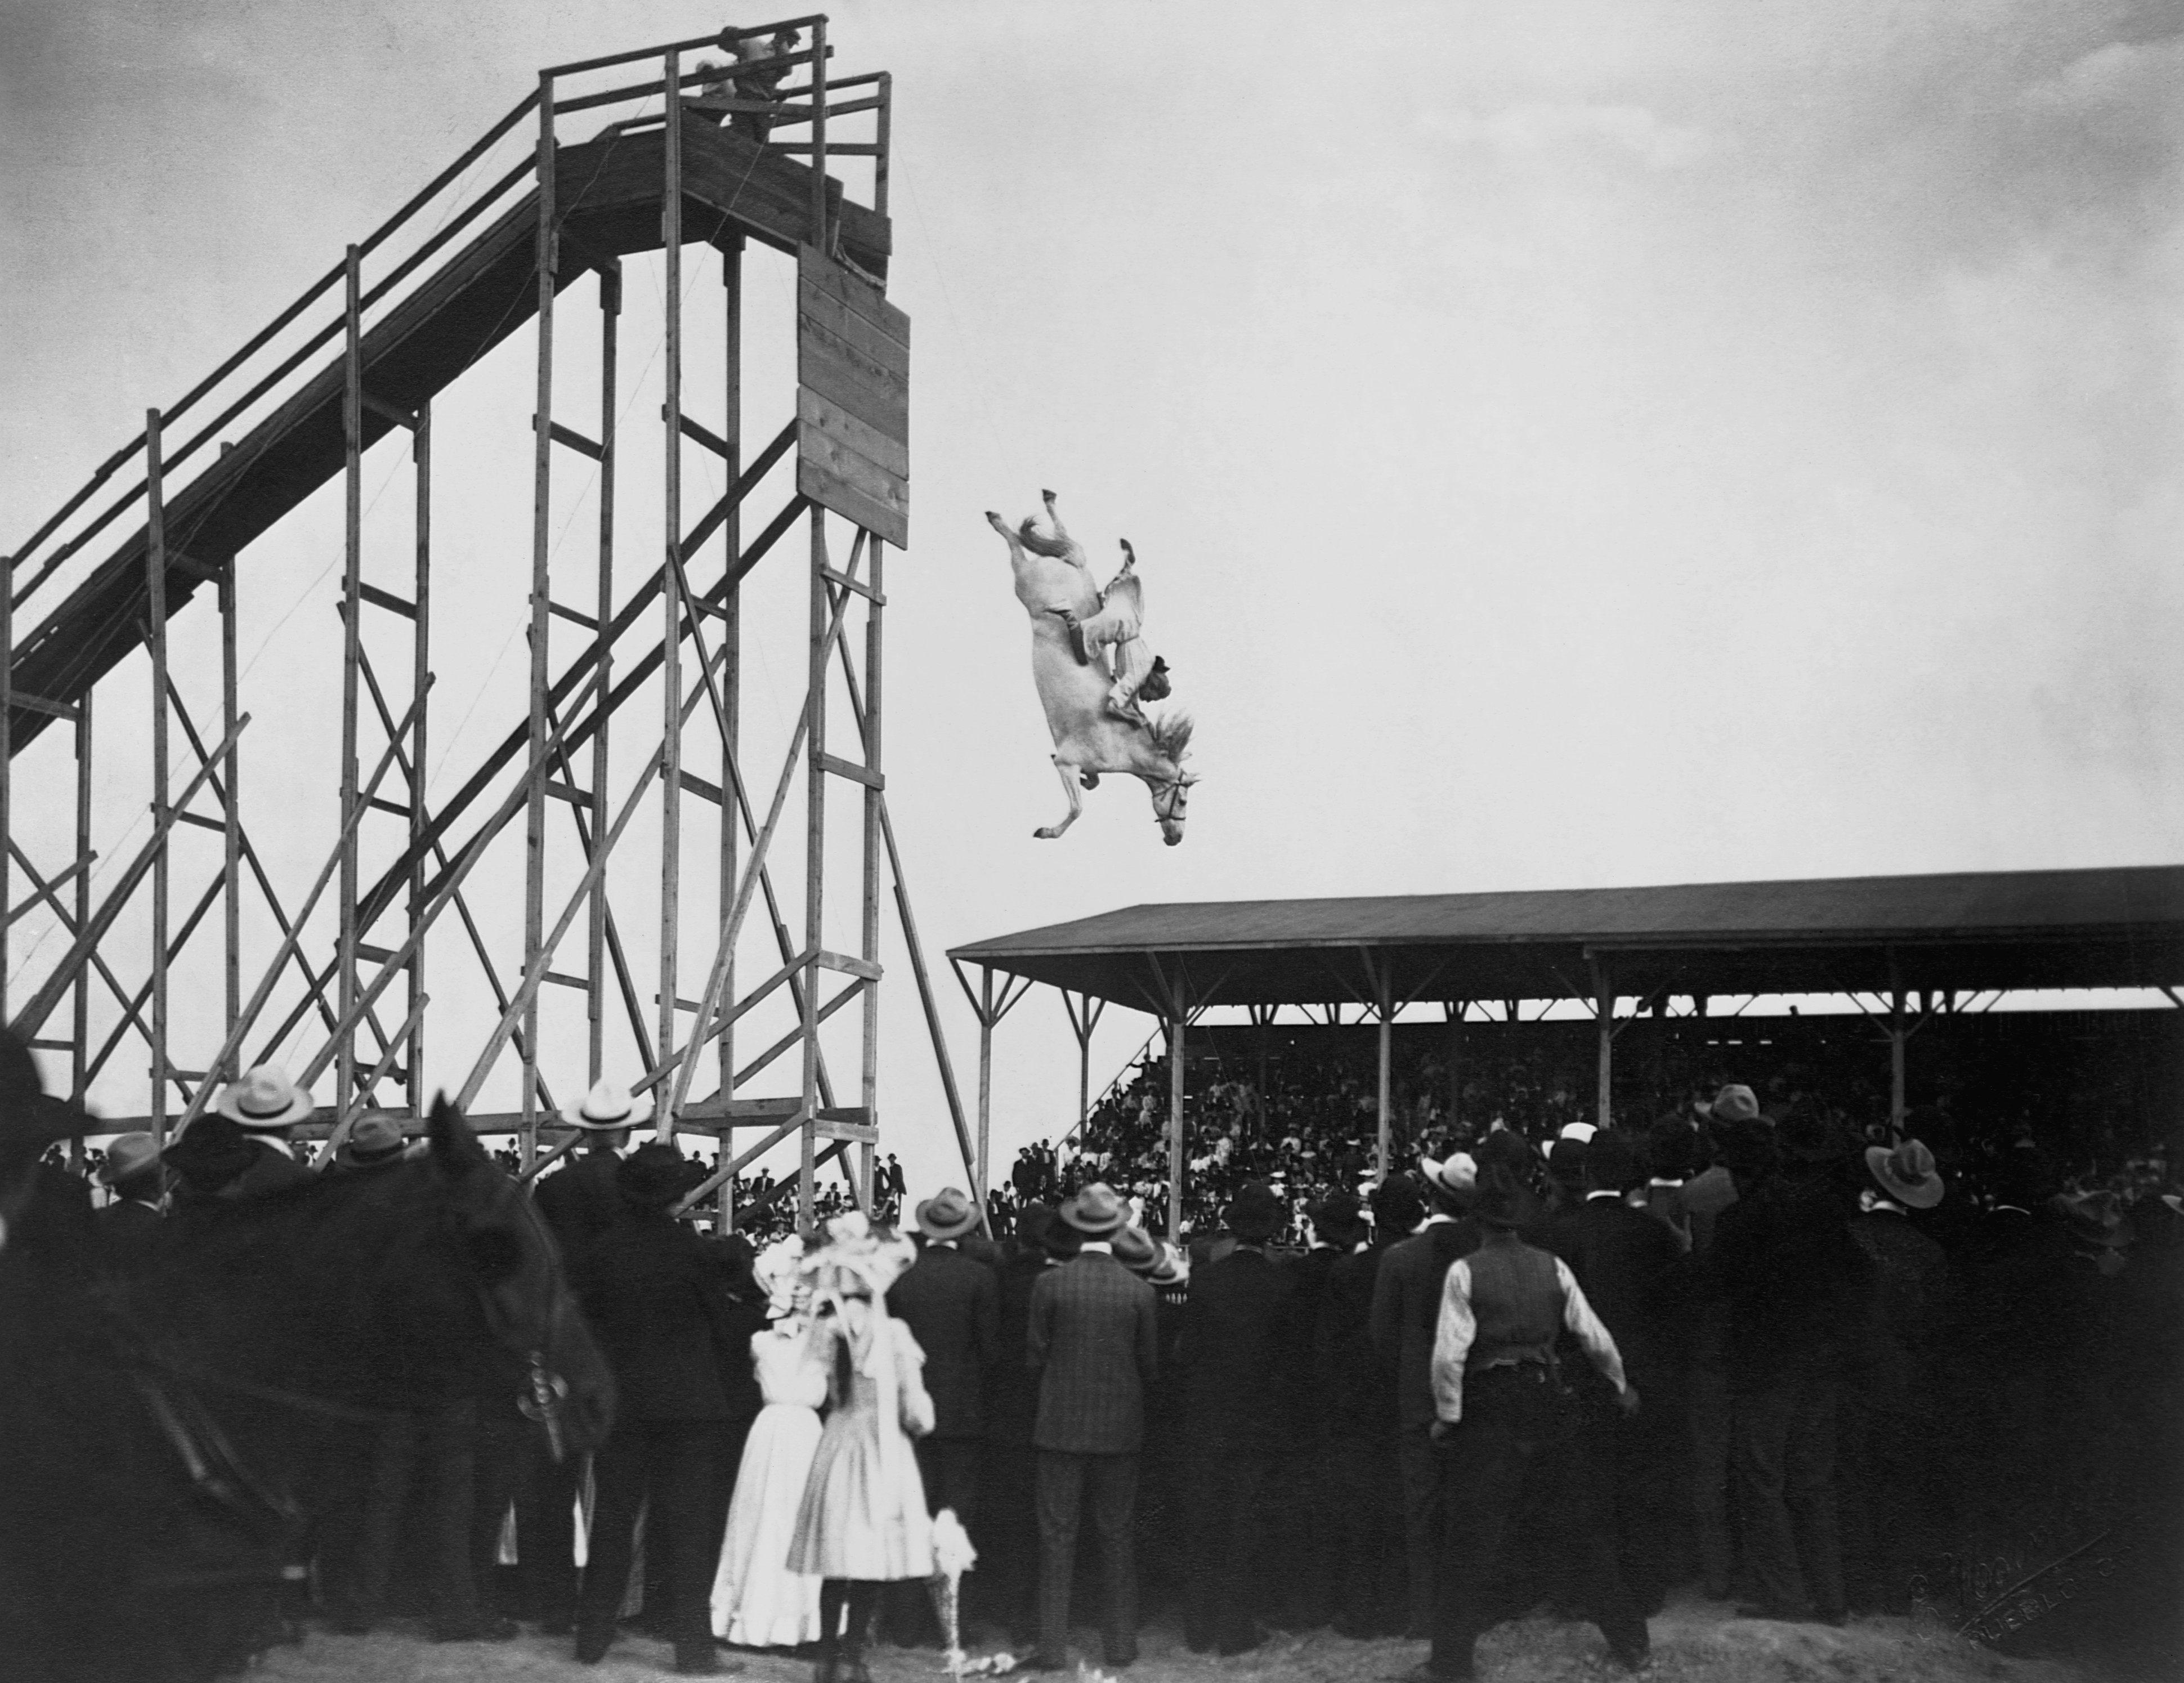 Eunice Winkless dives into a pool of water from a high tower on horseback on July 4, 1905 in Pueblo, Colorado